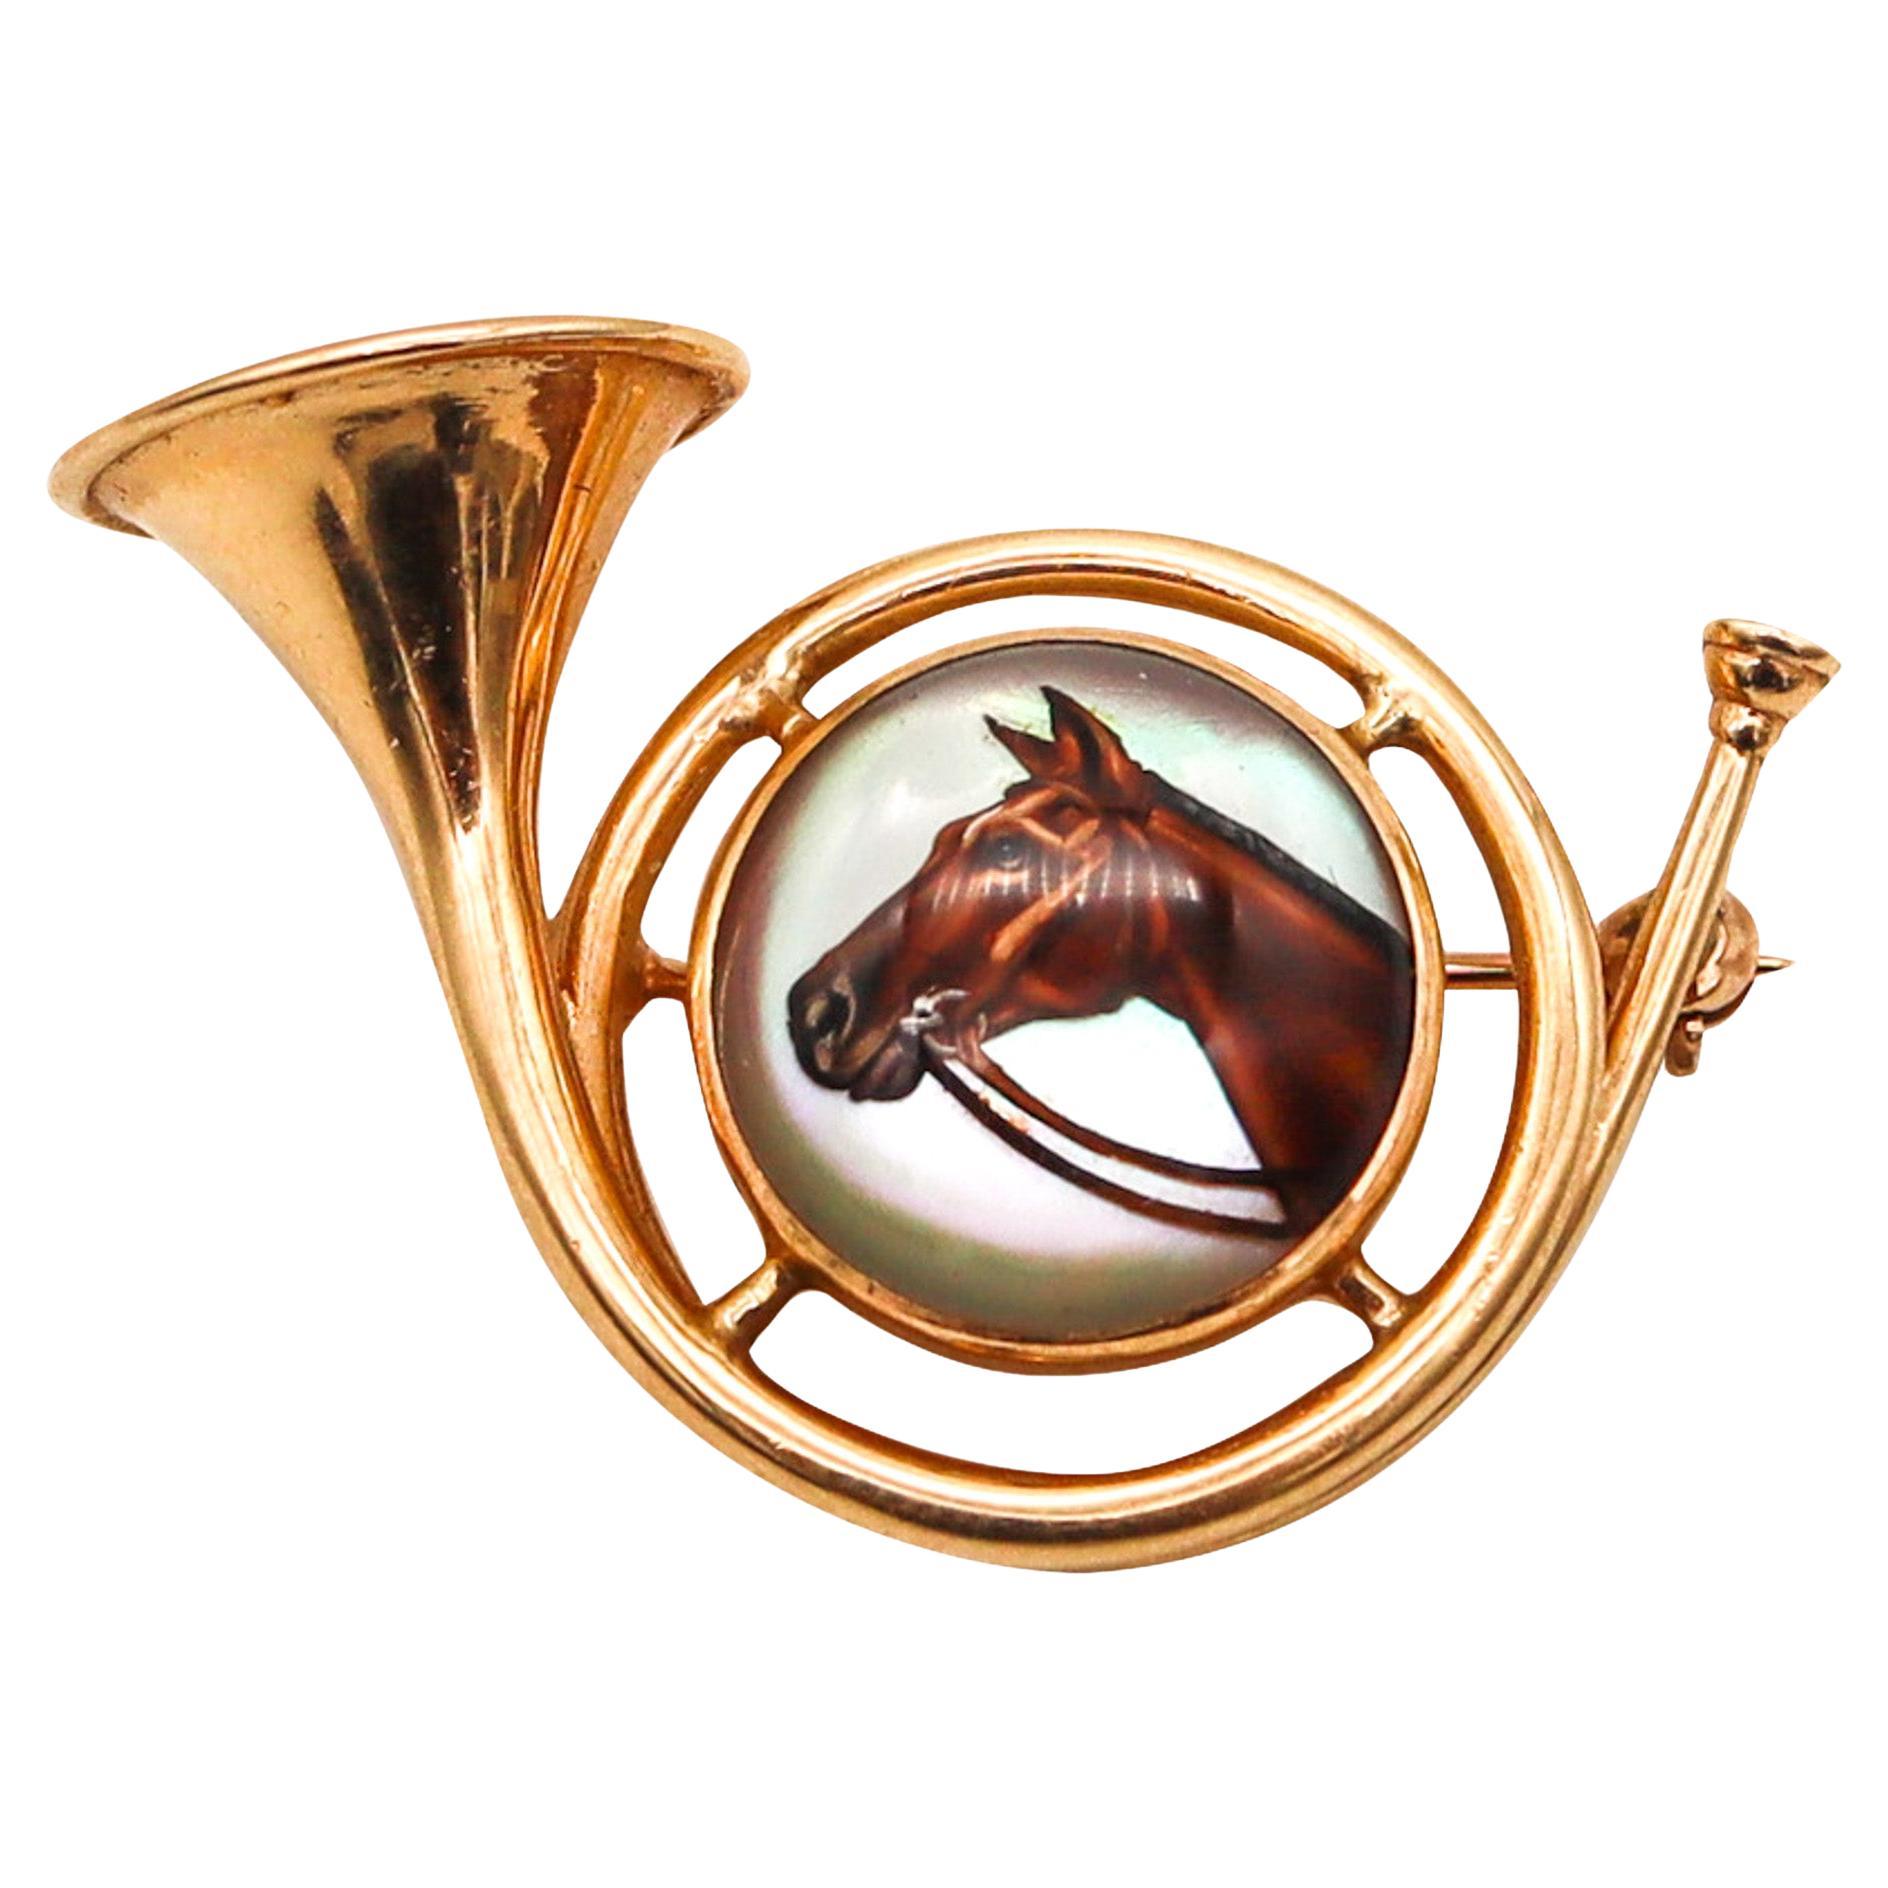 Henry Blank & Co. 1925 Essex Glass Hunting Trumpet Horse Pin In 14Kt Yellow Gold For Sale